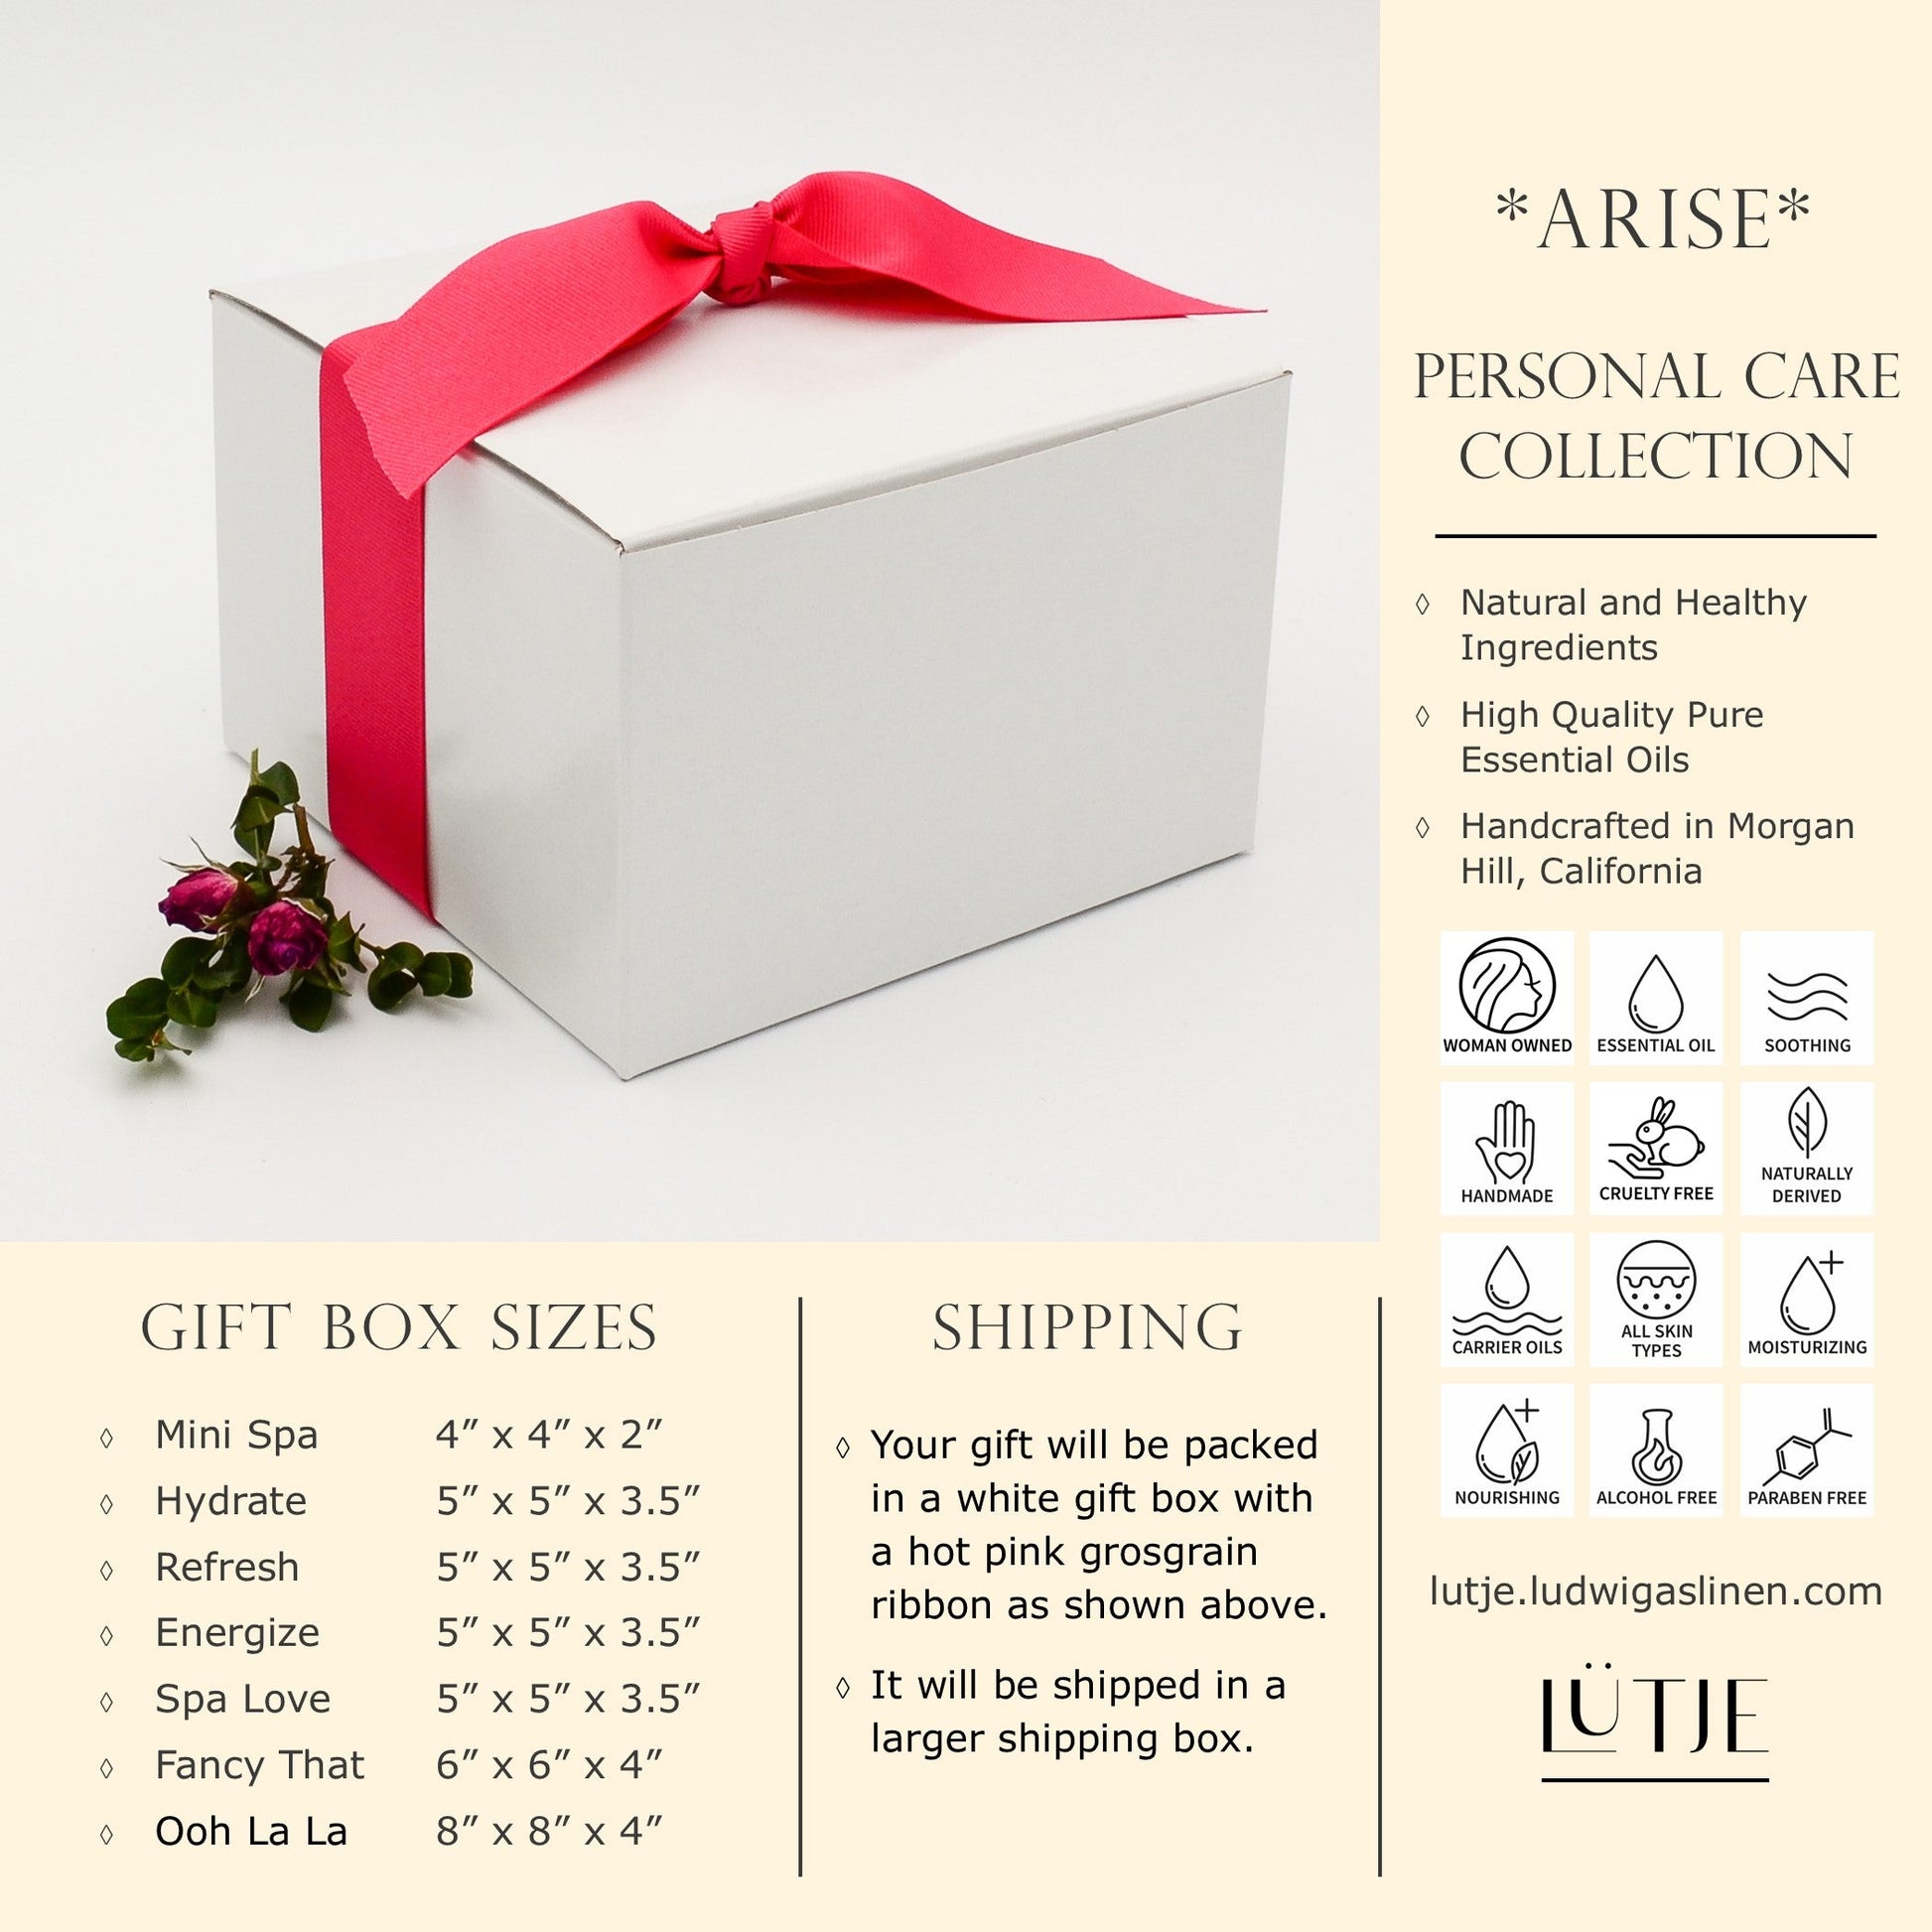 Gift Box for women Neroli & Jasmine Arise Collection shipping and general information including made with natural and healthy ingredients,woman owned, handmade, cruelty free, naturally derived, pure essential oils, all skin types, moisturizing, soothing, nourishing, alcohol free and paraben free. 